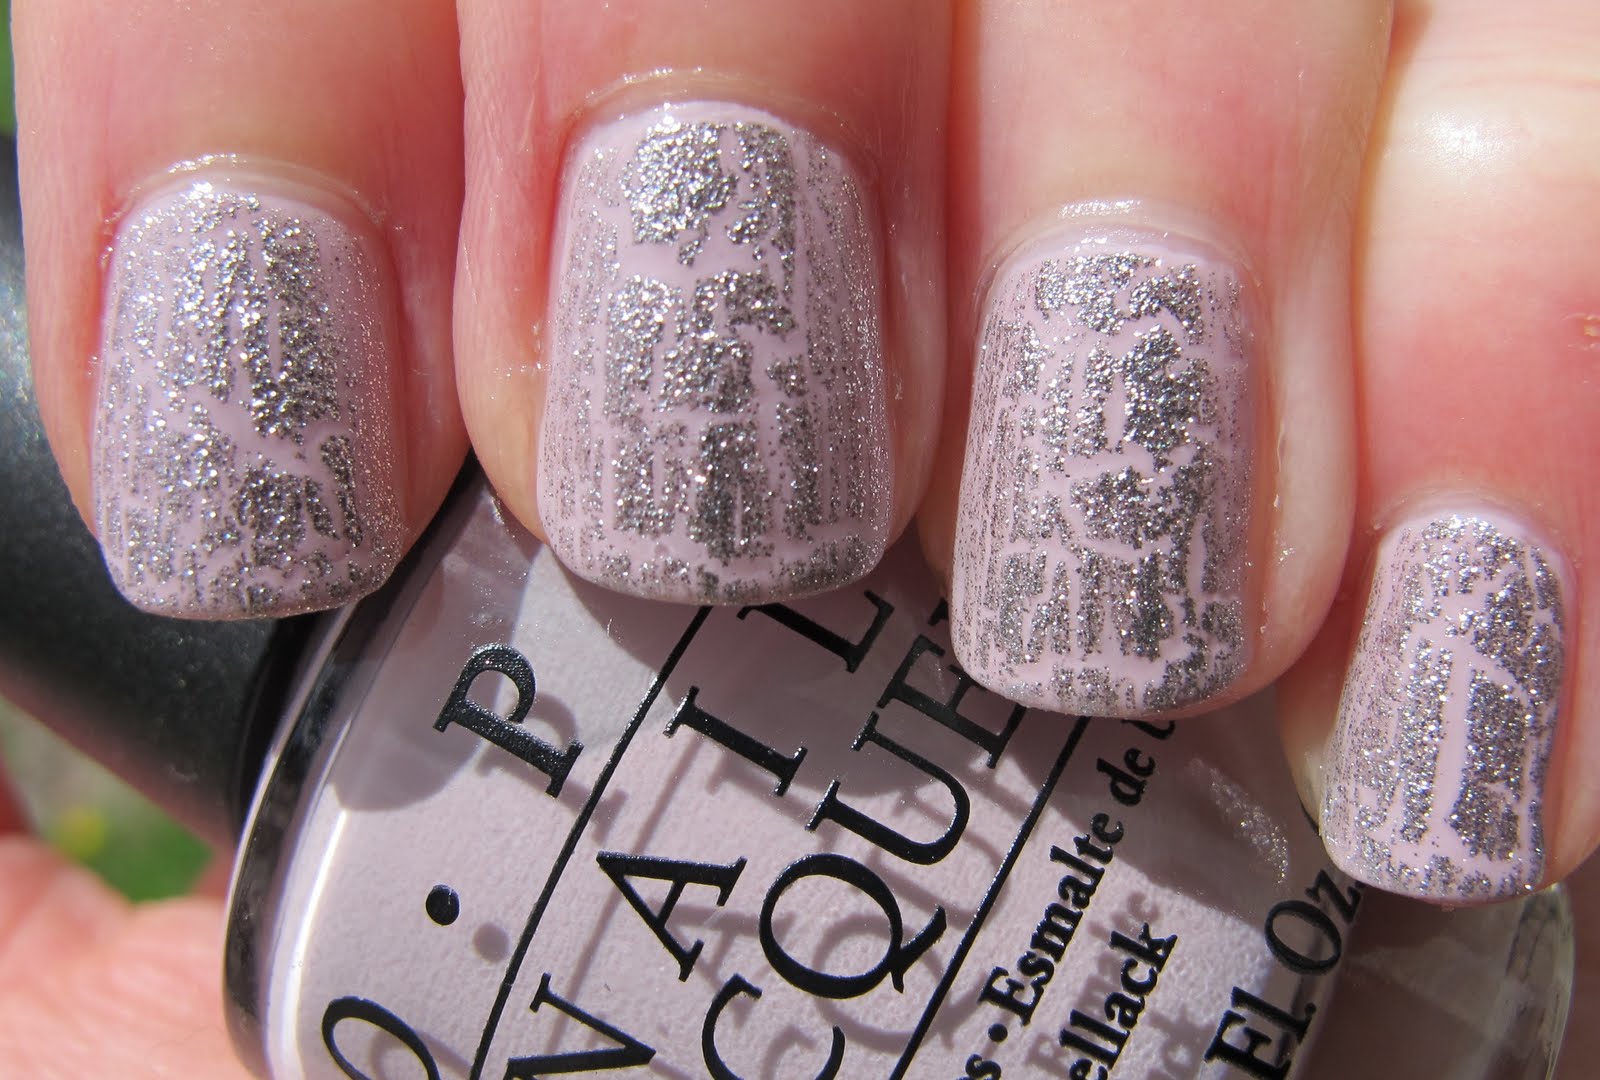 10. OPI Shatter Nail Polish in Silver Shatter - wide 6